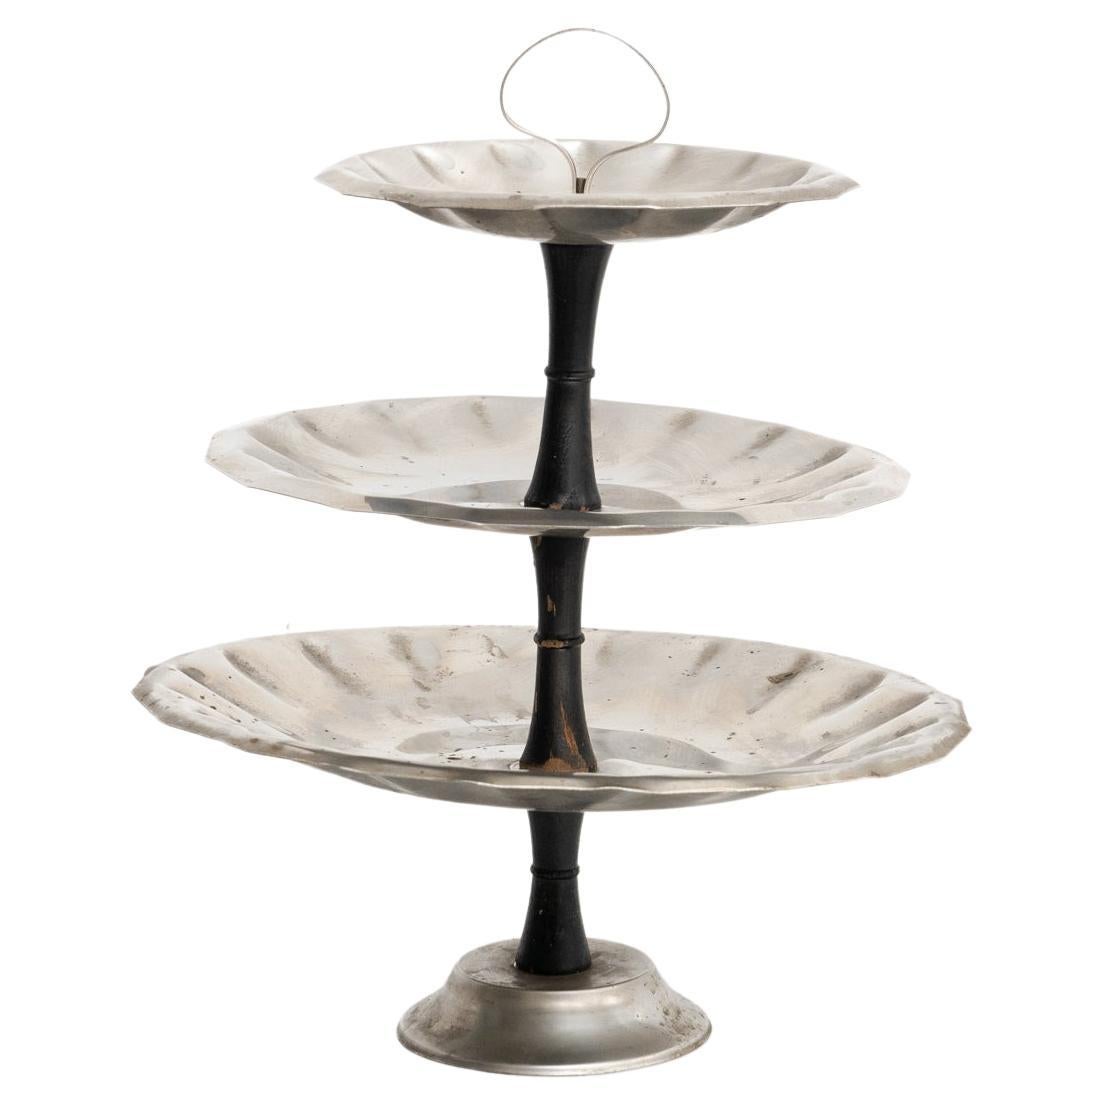 Early 20th Century Spanish Three Tier Dessert Stand For Sale